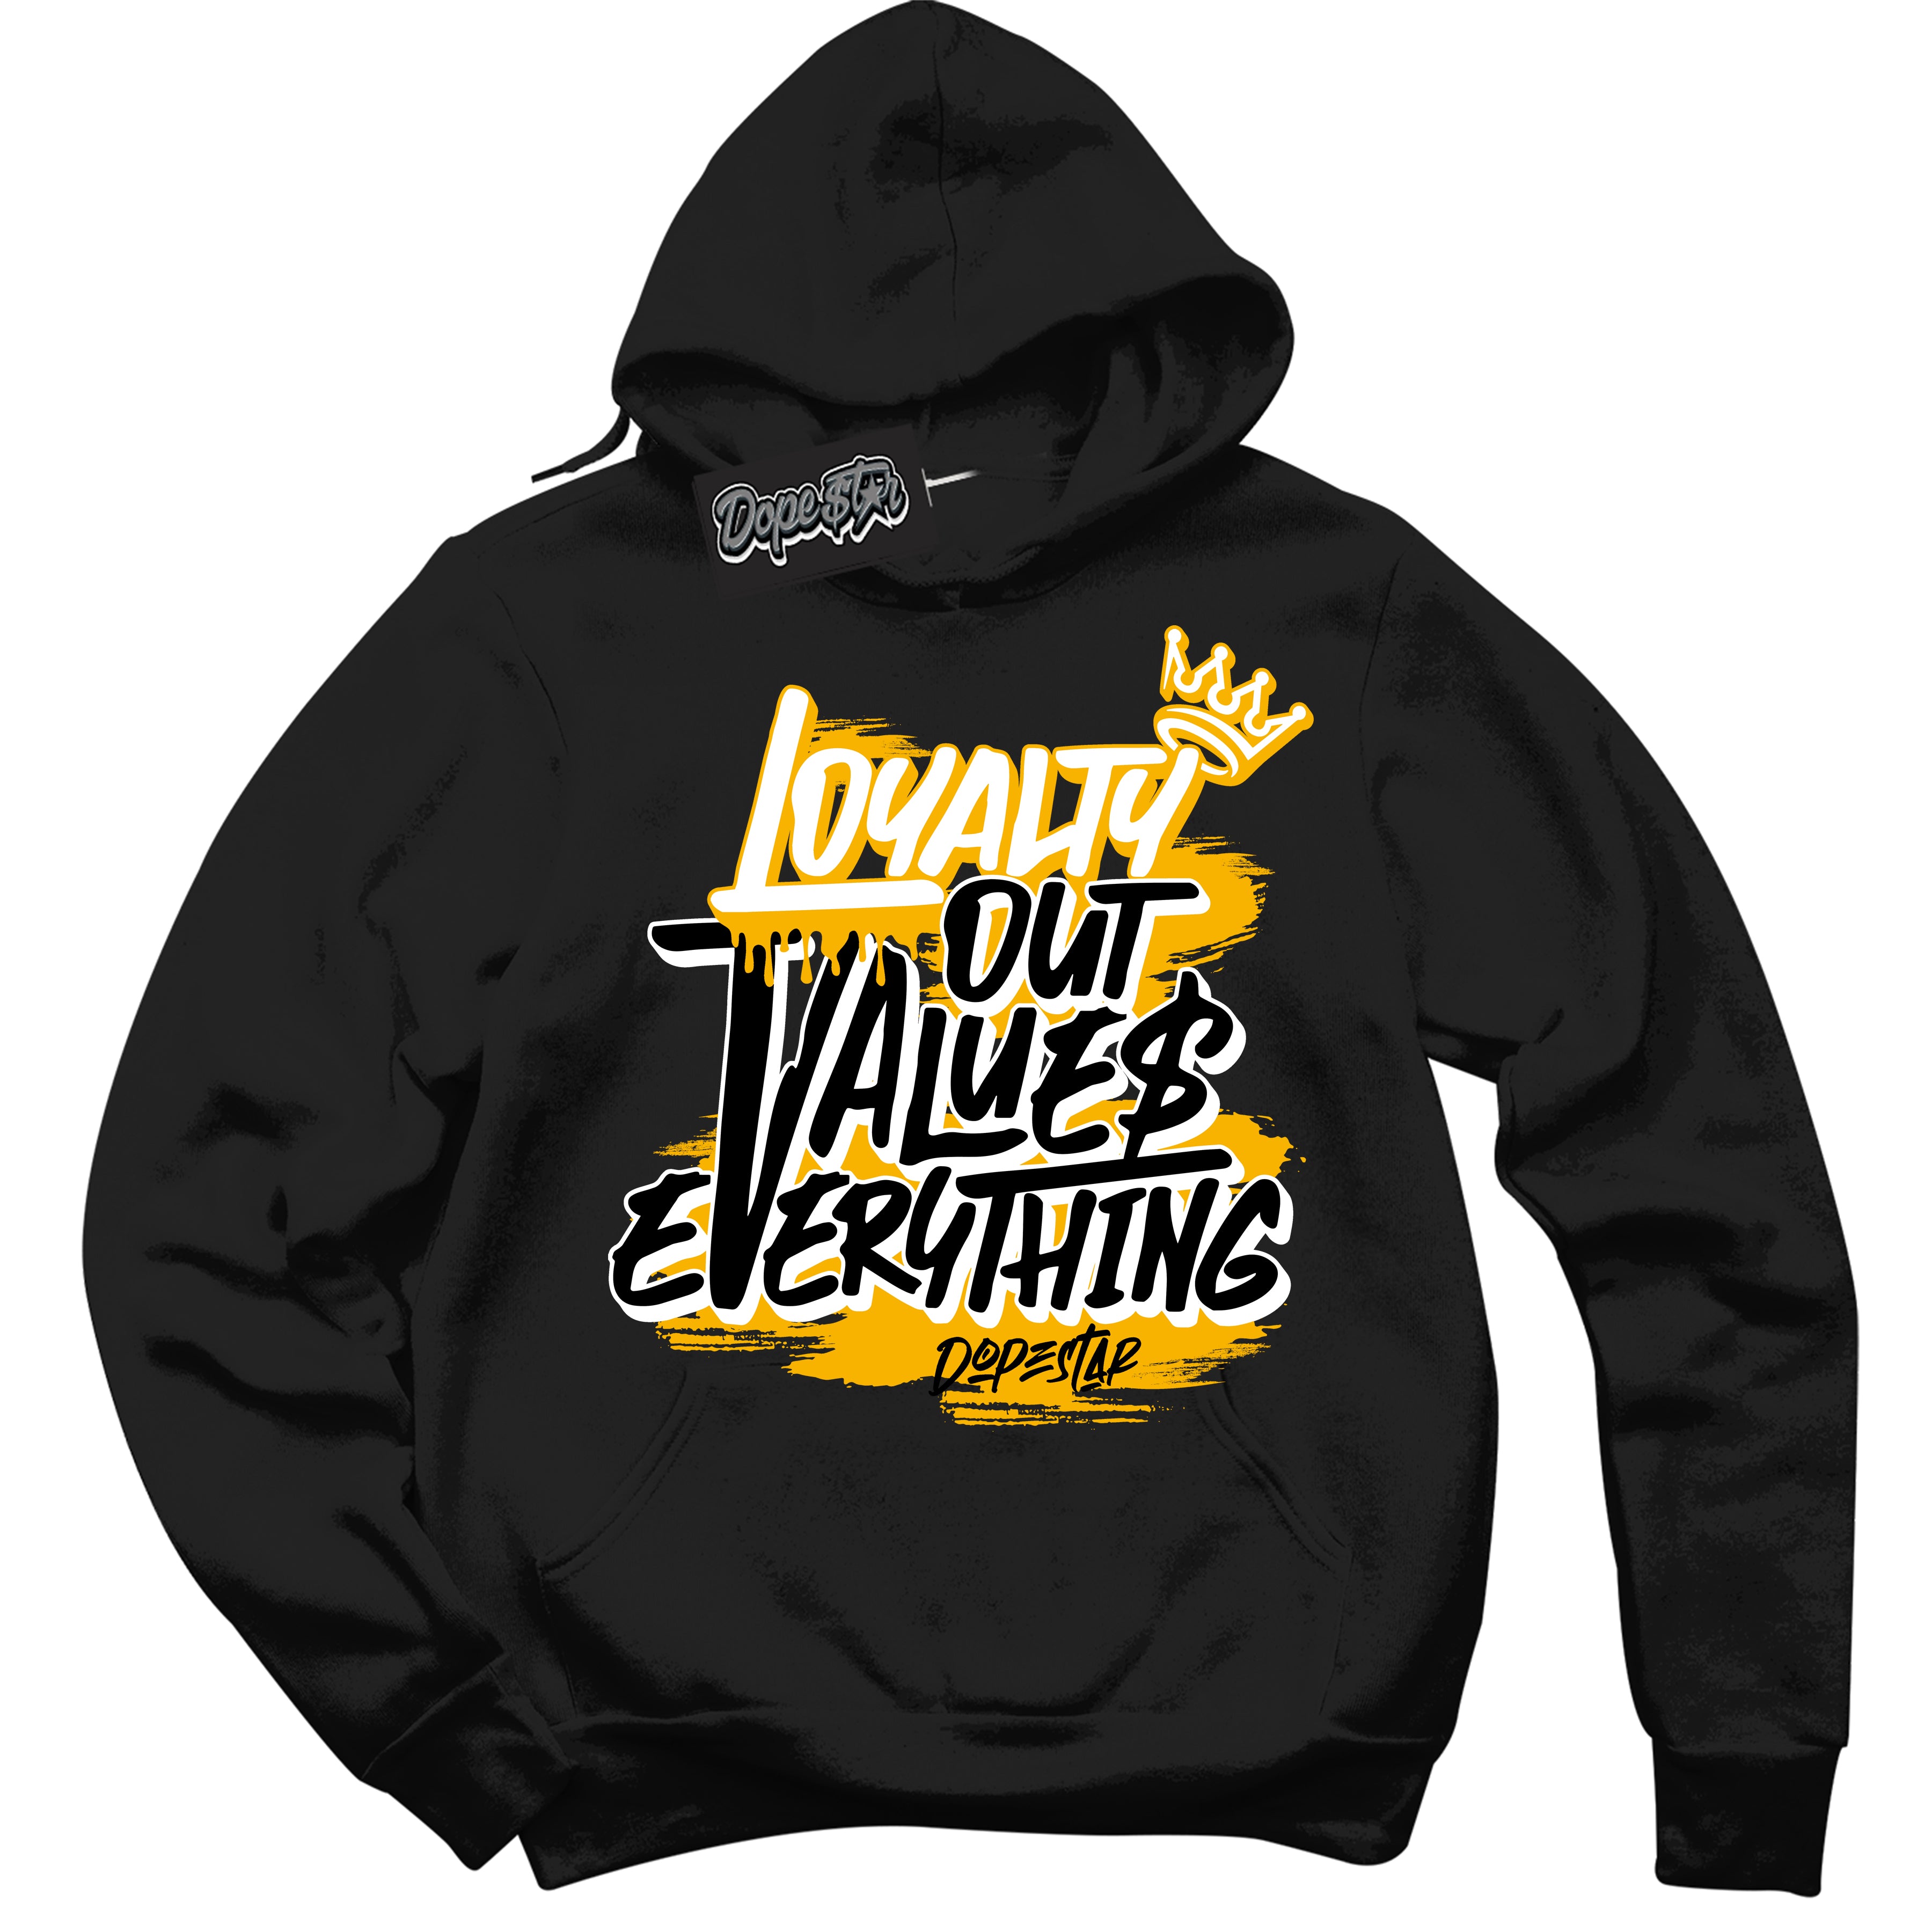 Cool Black Hoodie with “ Loyalty Out Values Everything ”  design that Perfectly Matches  Reverse Goldenrod 2024 Sneakers.